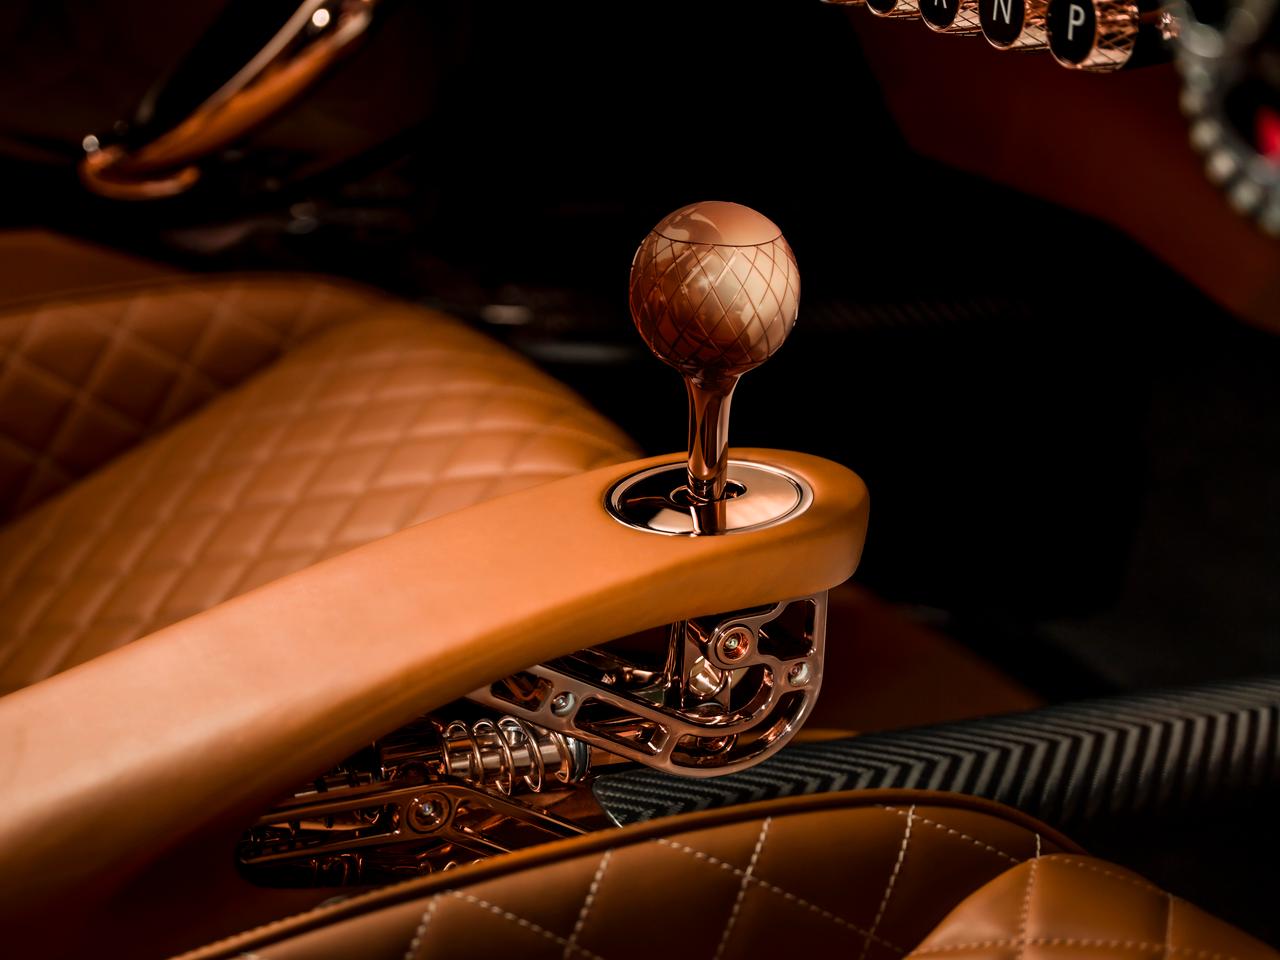 This gearshift lever mechanism design borders on steampunk